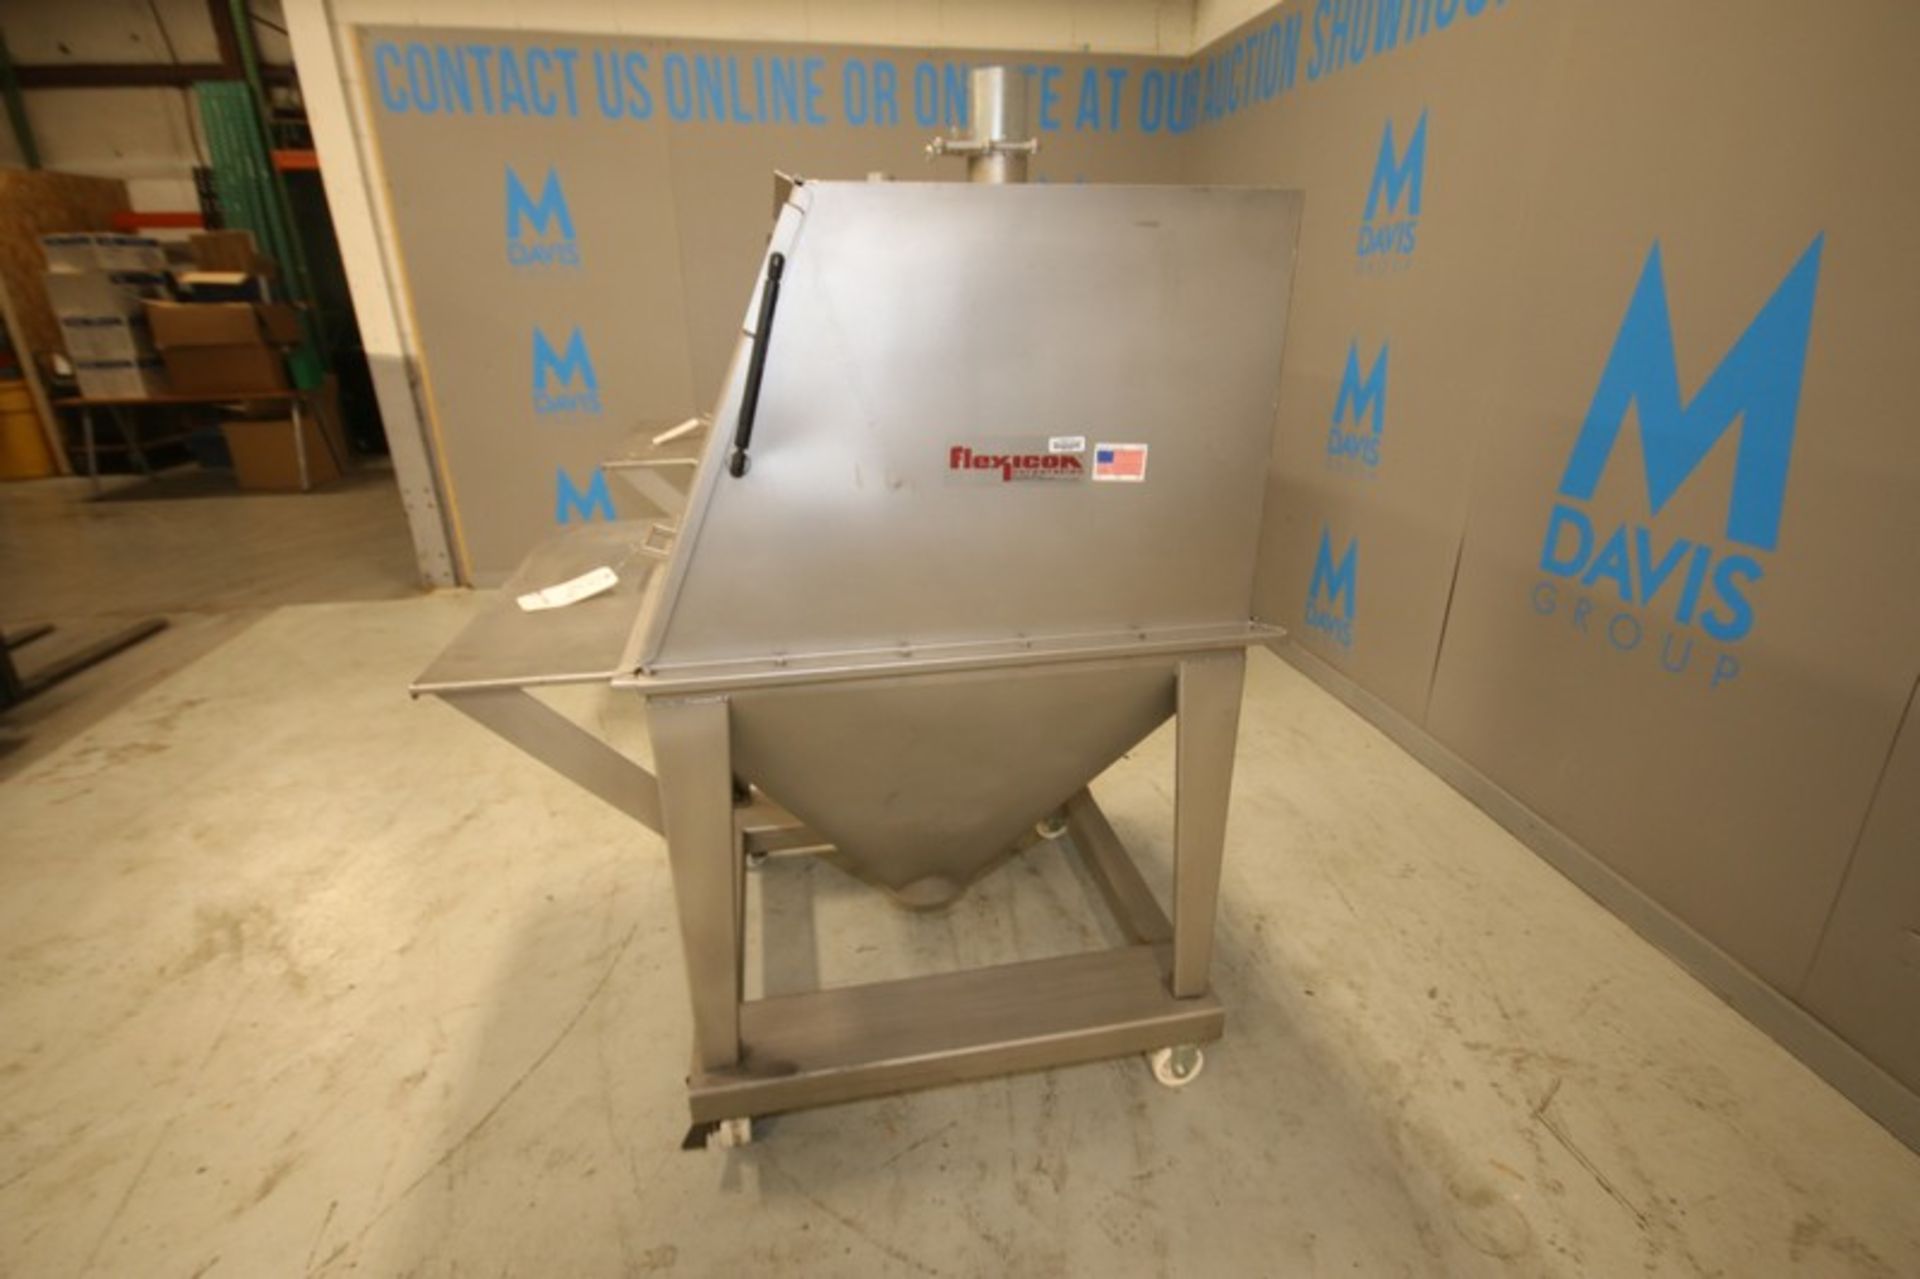 Flexicon S/S Portable Powder Dump Hopper, SN 46023, with 36" W x 36" L Interior with Hinged Lid, S/S - Image 3 of 6